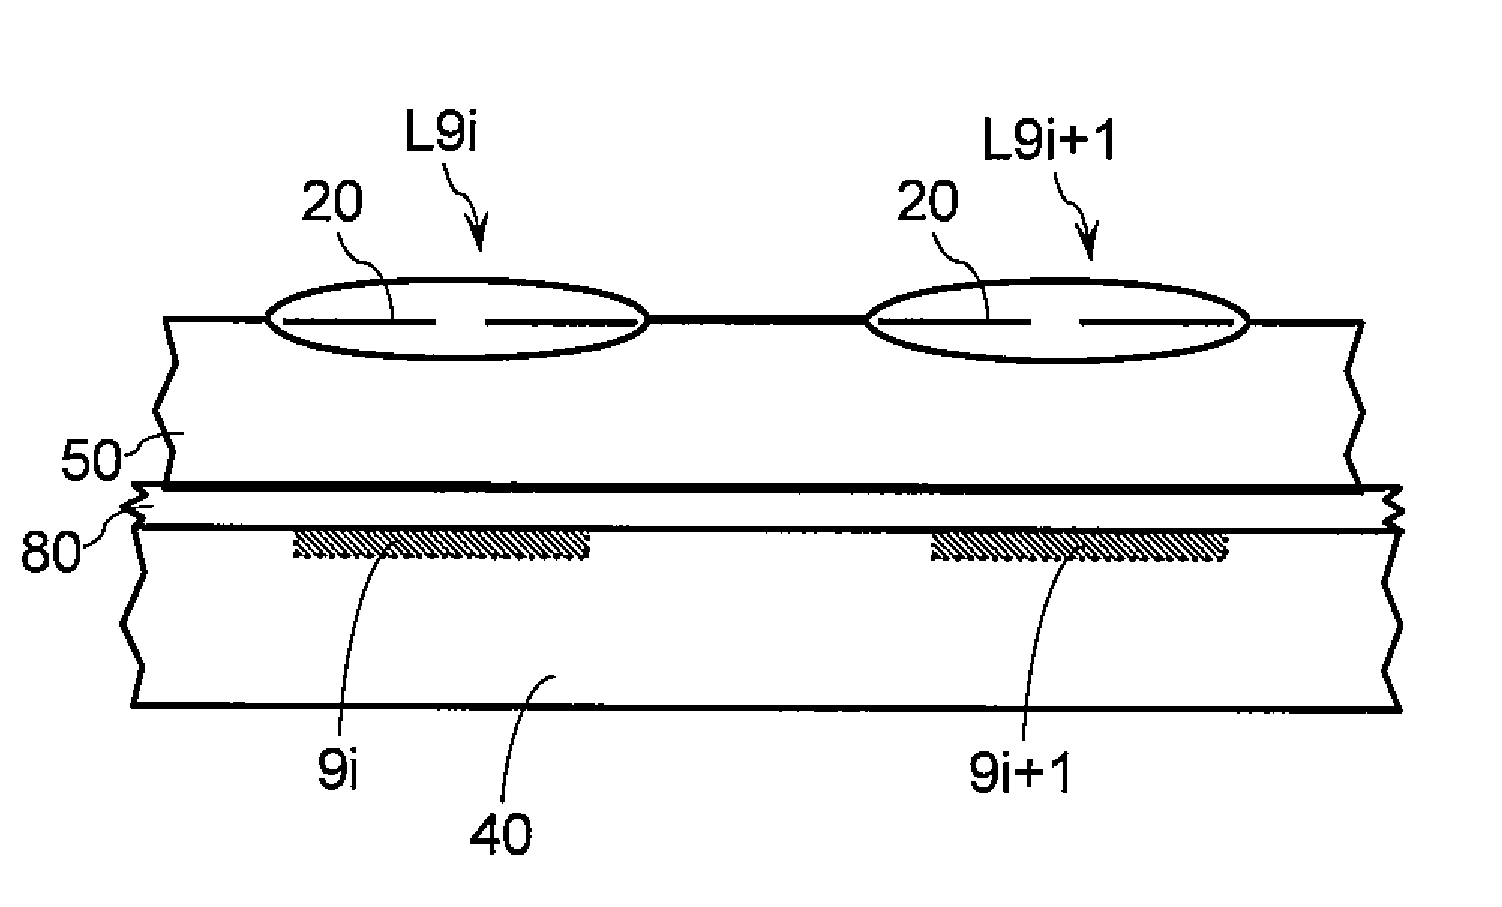 Method for manufacturing lenses, in particular for an imager comprising a diaphragm